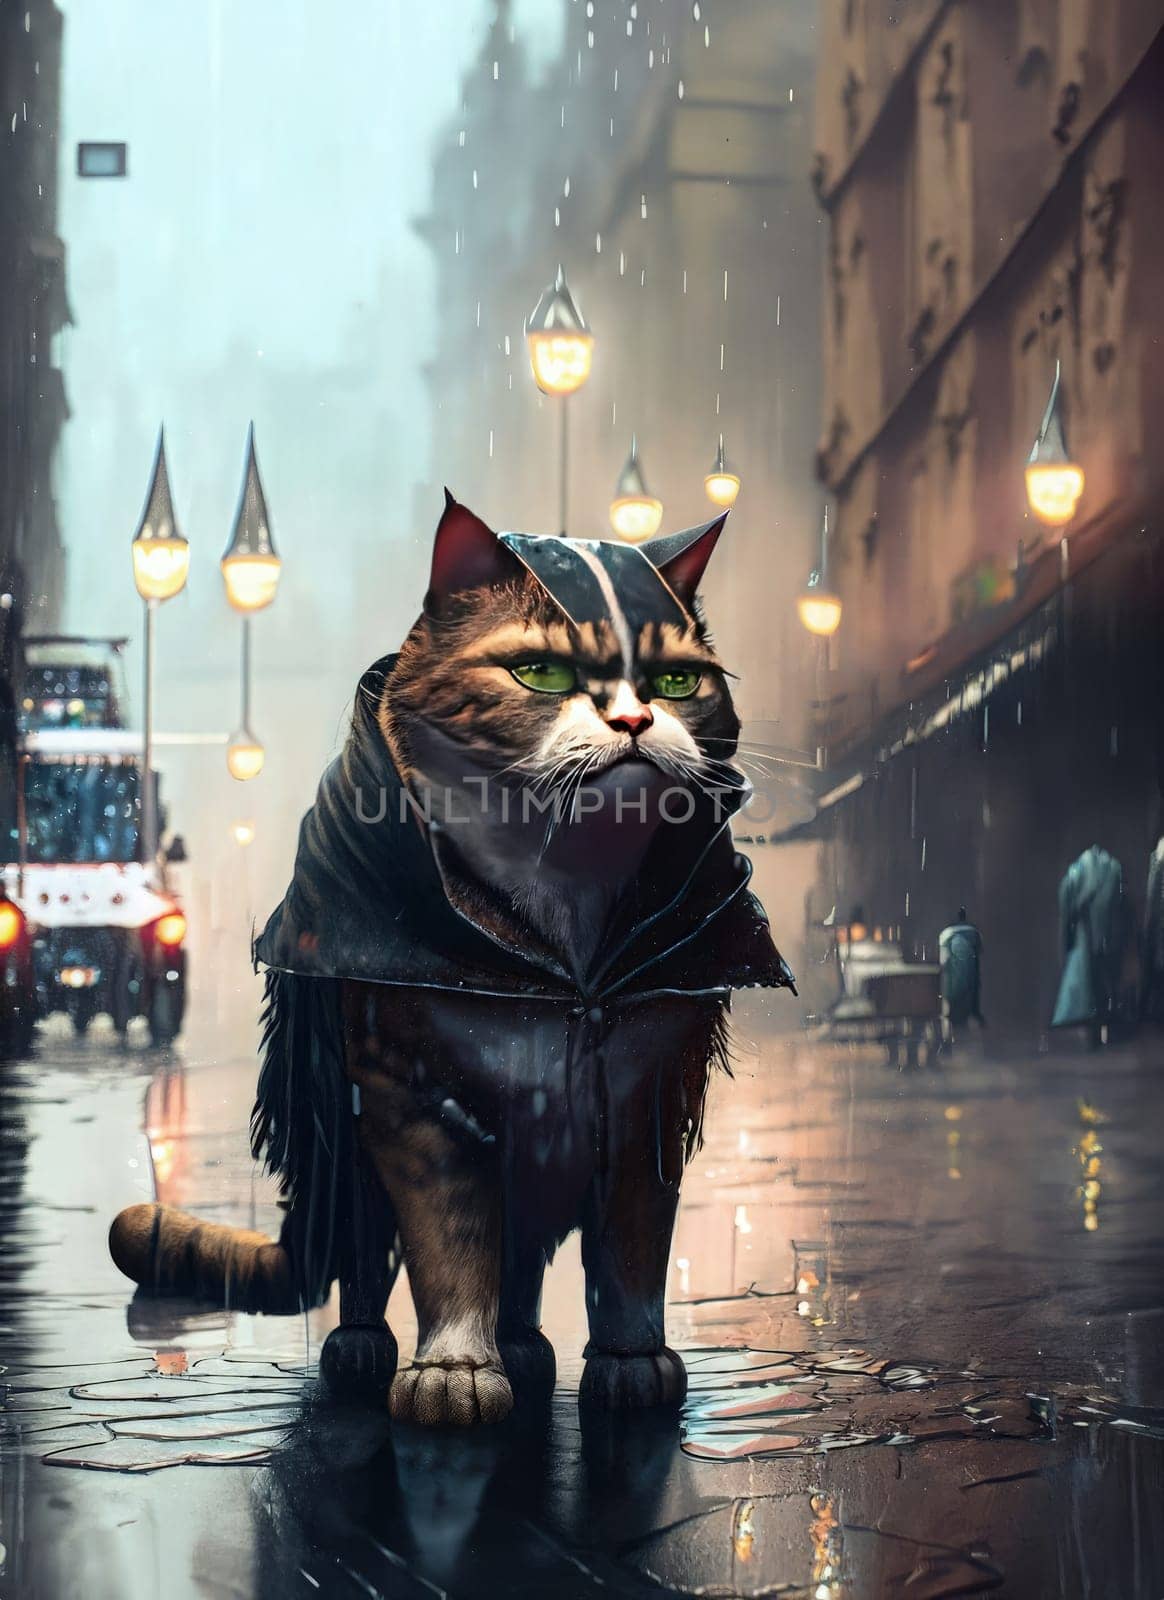 A cat in a raincoat walks through the streets of the city by Waseem-Creations